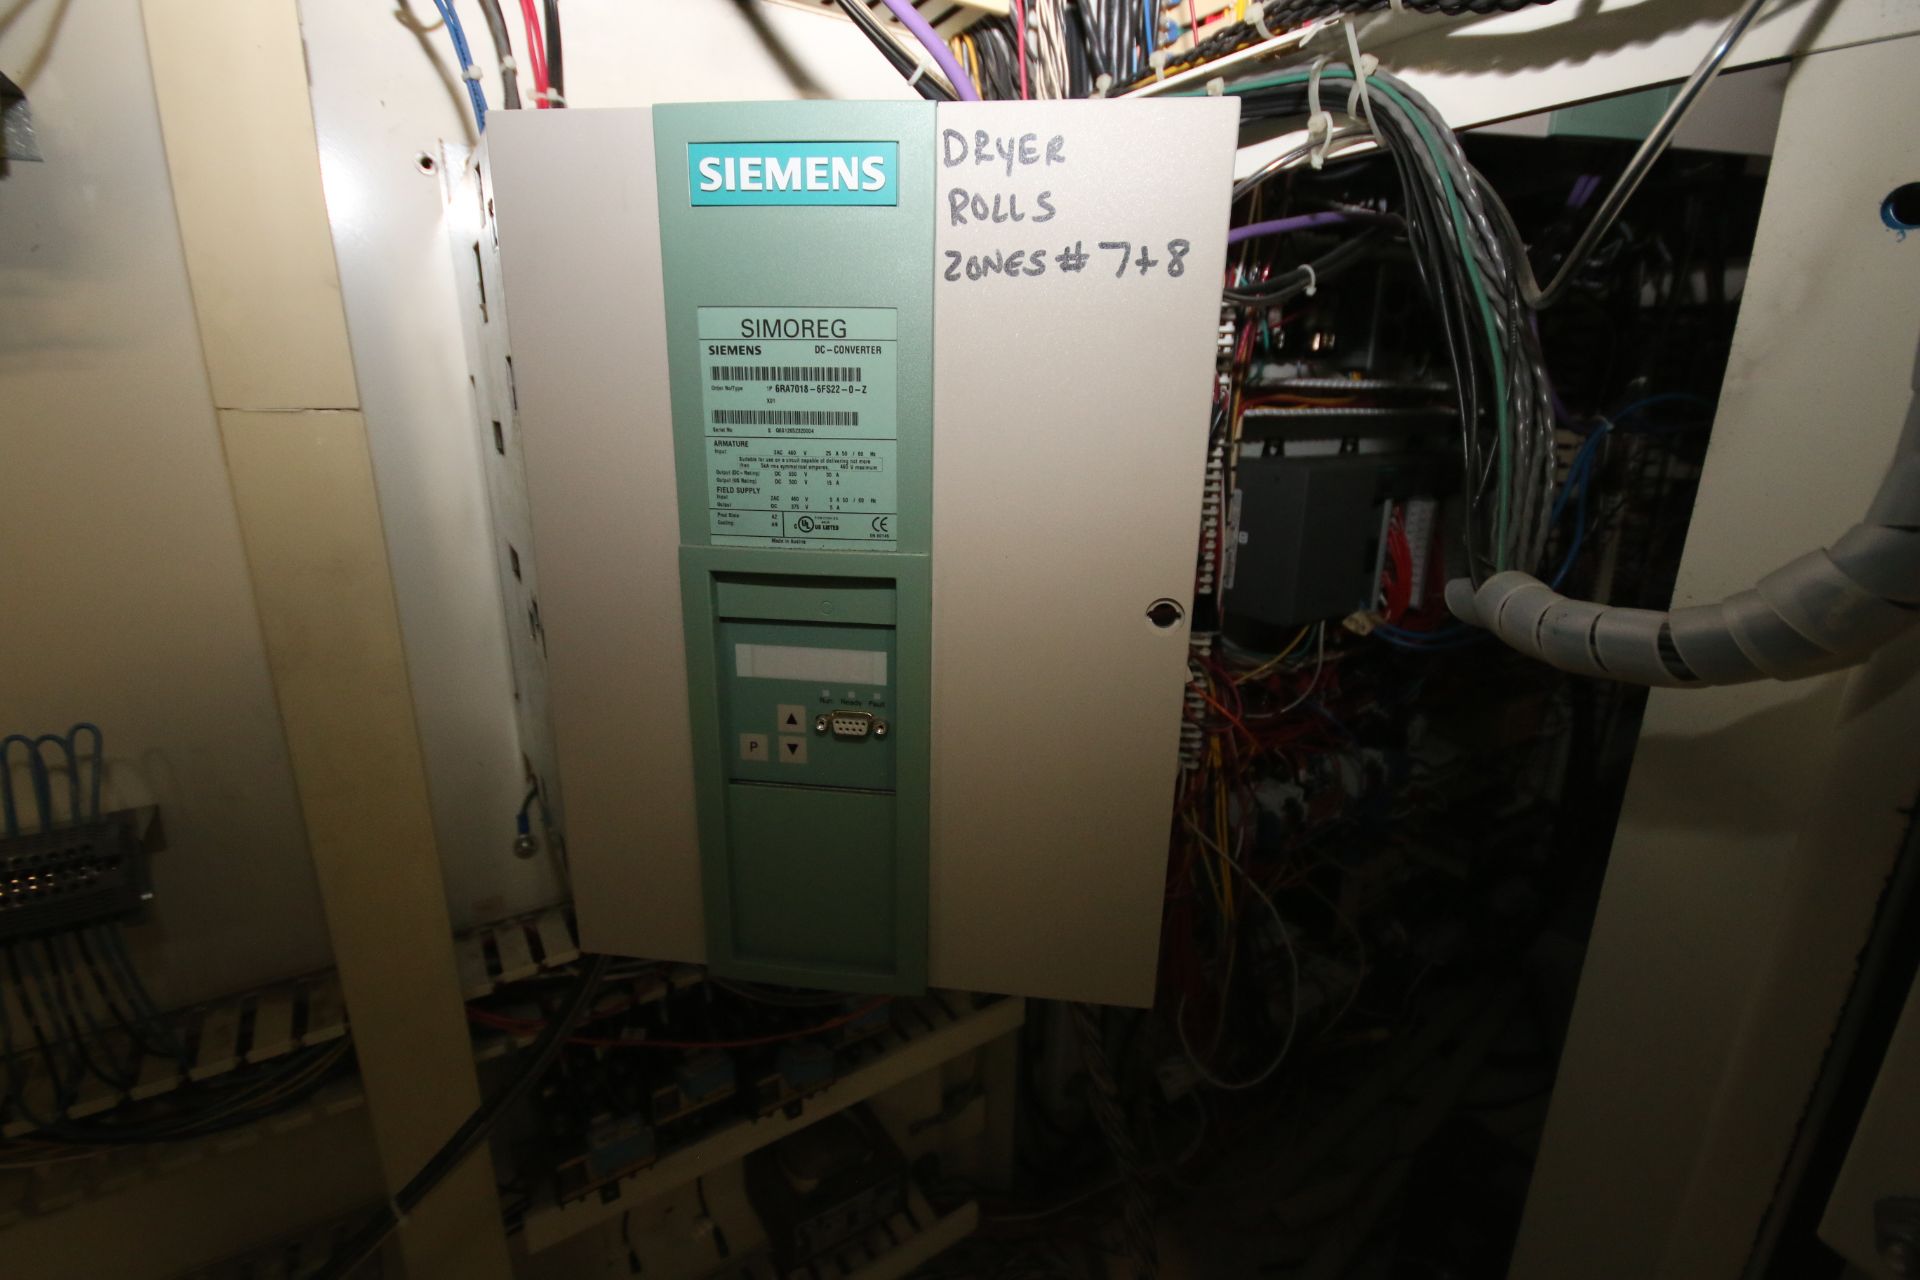 (2) Dryer Control Panels for Dryer Rolls Zones 1 to 8 with Electro Flyte (4) Siemens DC/ - Image 6 of 9